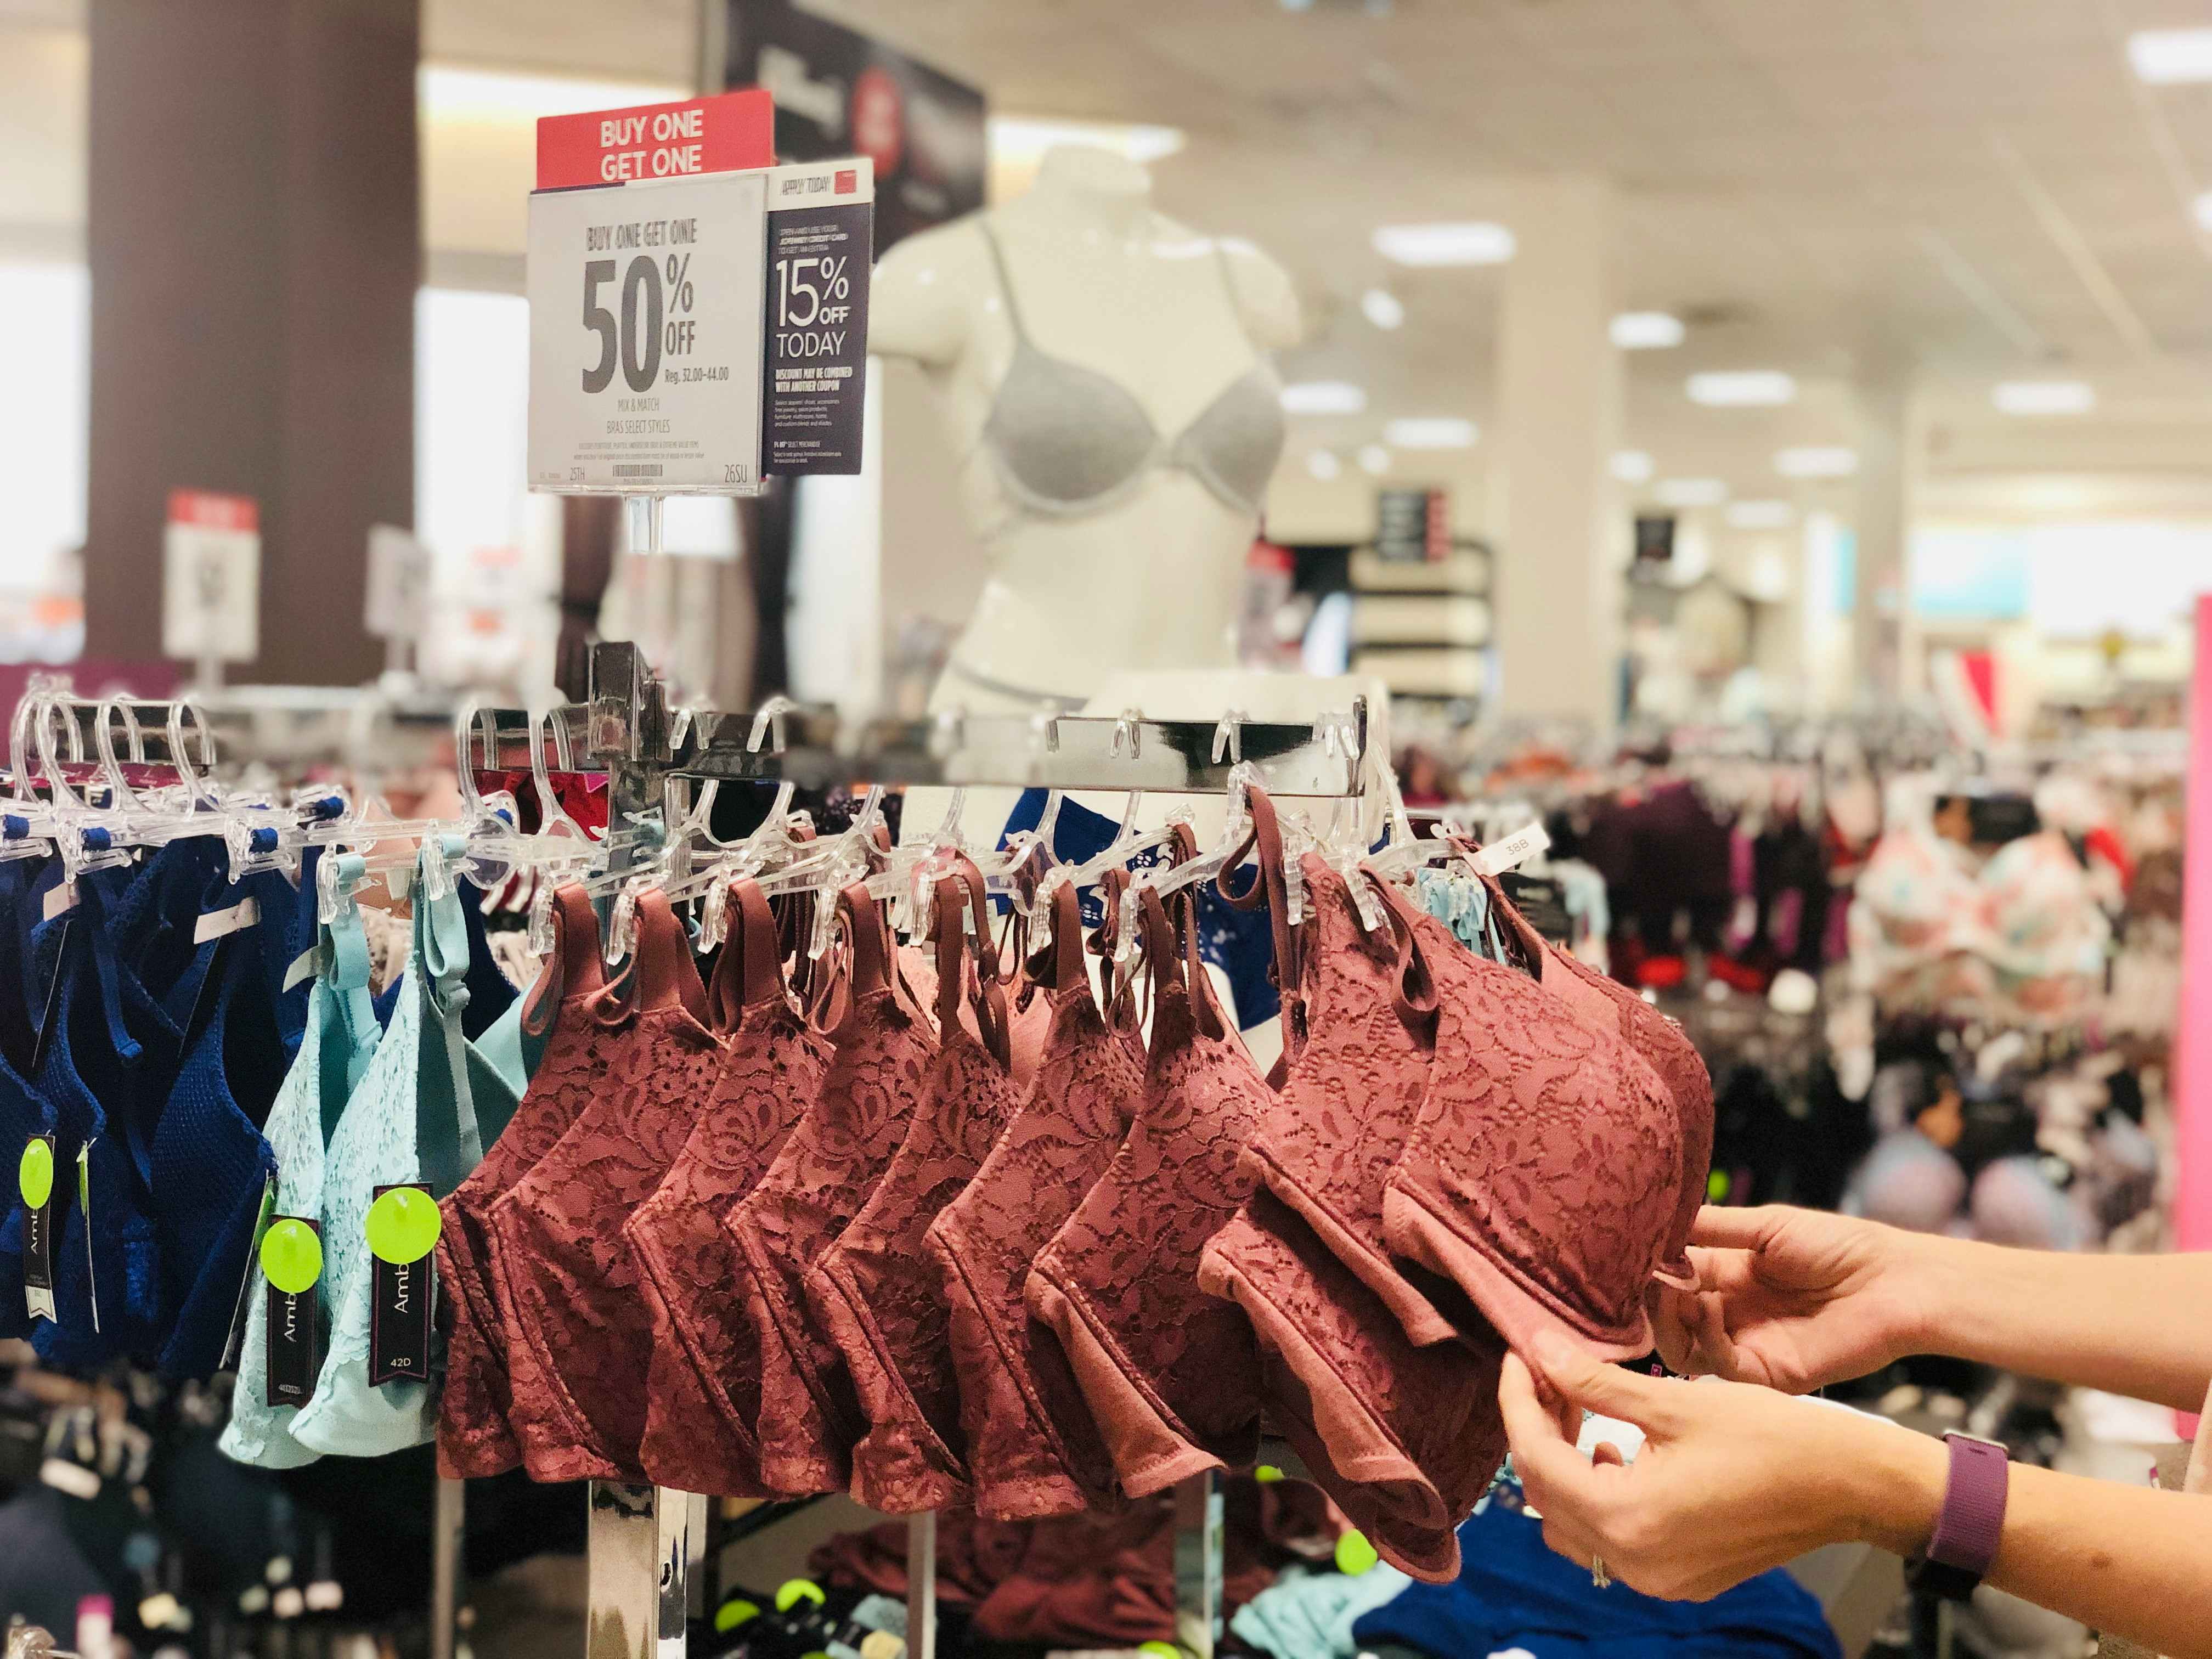 The best items to buy at JCPenney include linens, jackets, bras and boots.